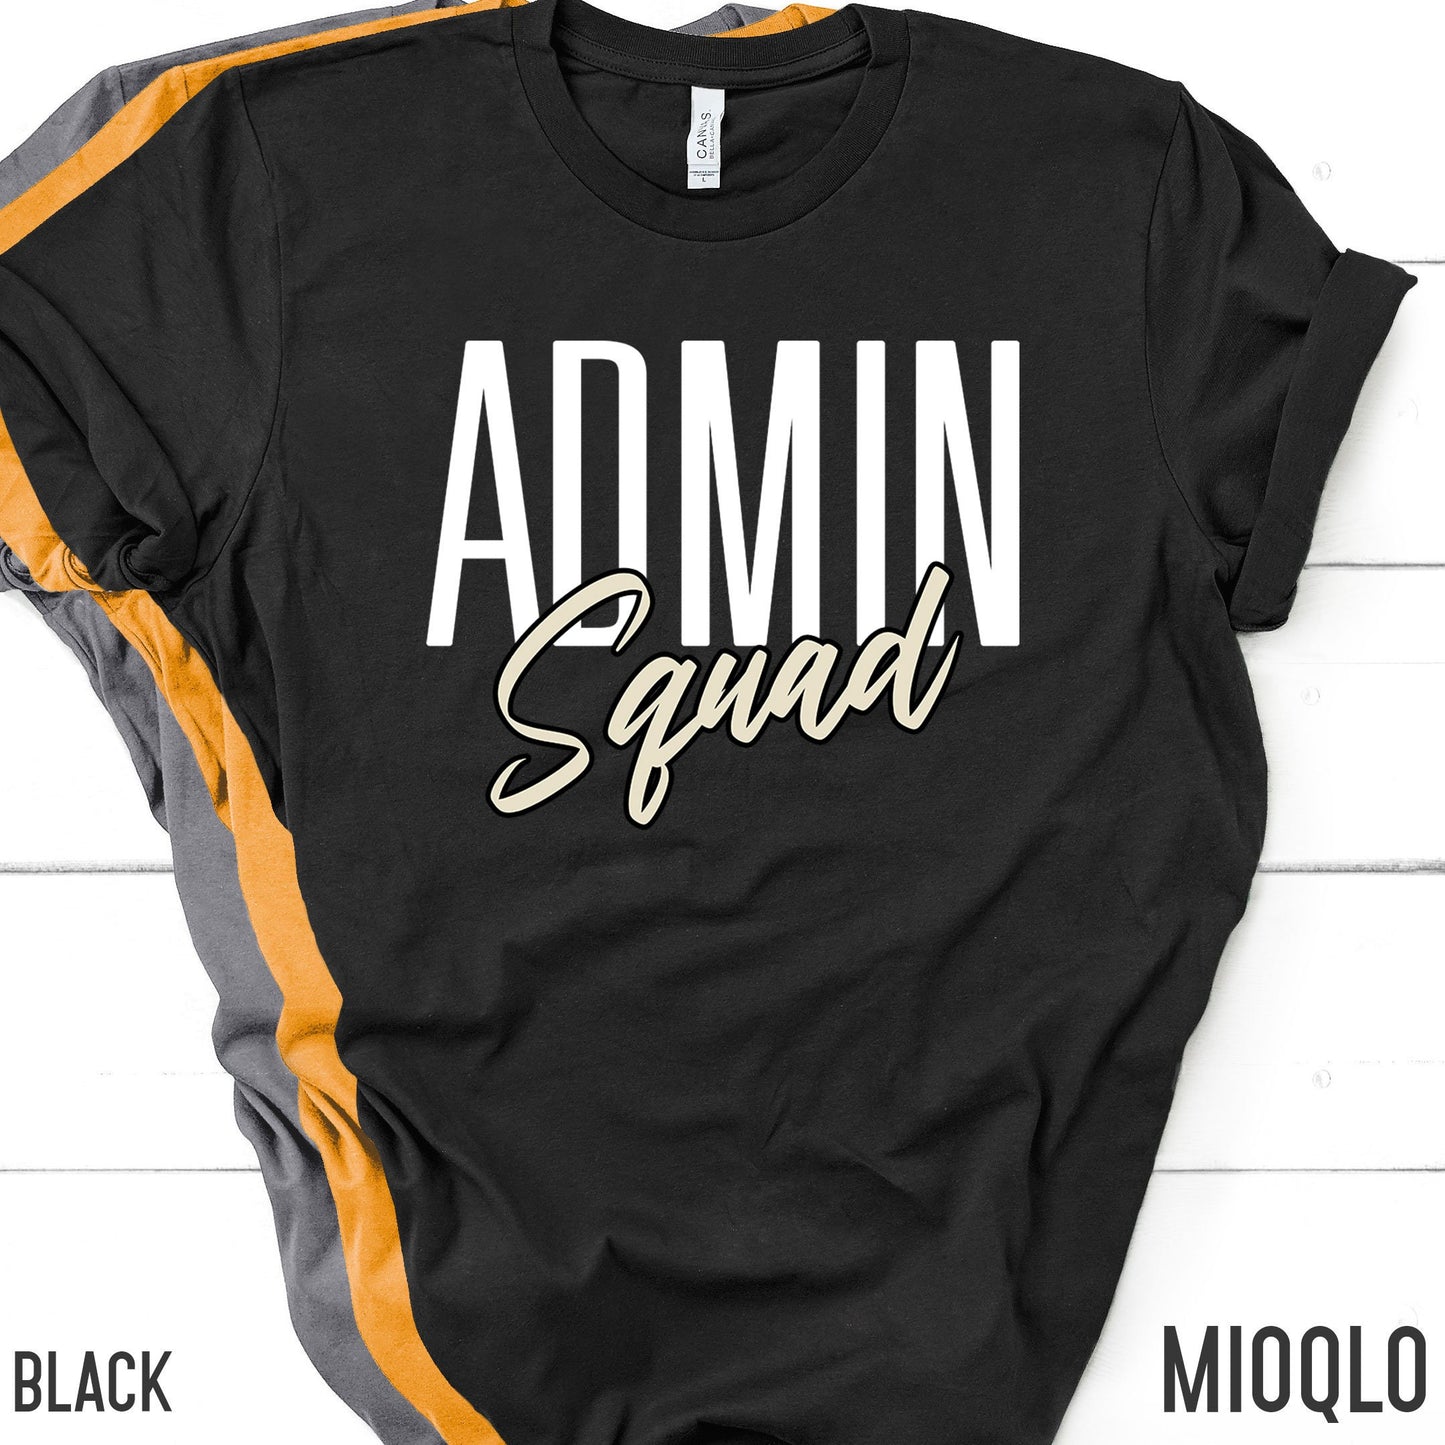 Admin Squad T-shirt, Matching Office Staff Tee, Secretary Staff Office Administrative Tank, Unisex Comfy Clothing For Summer, School Office